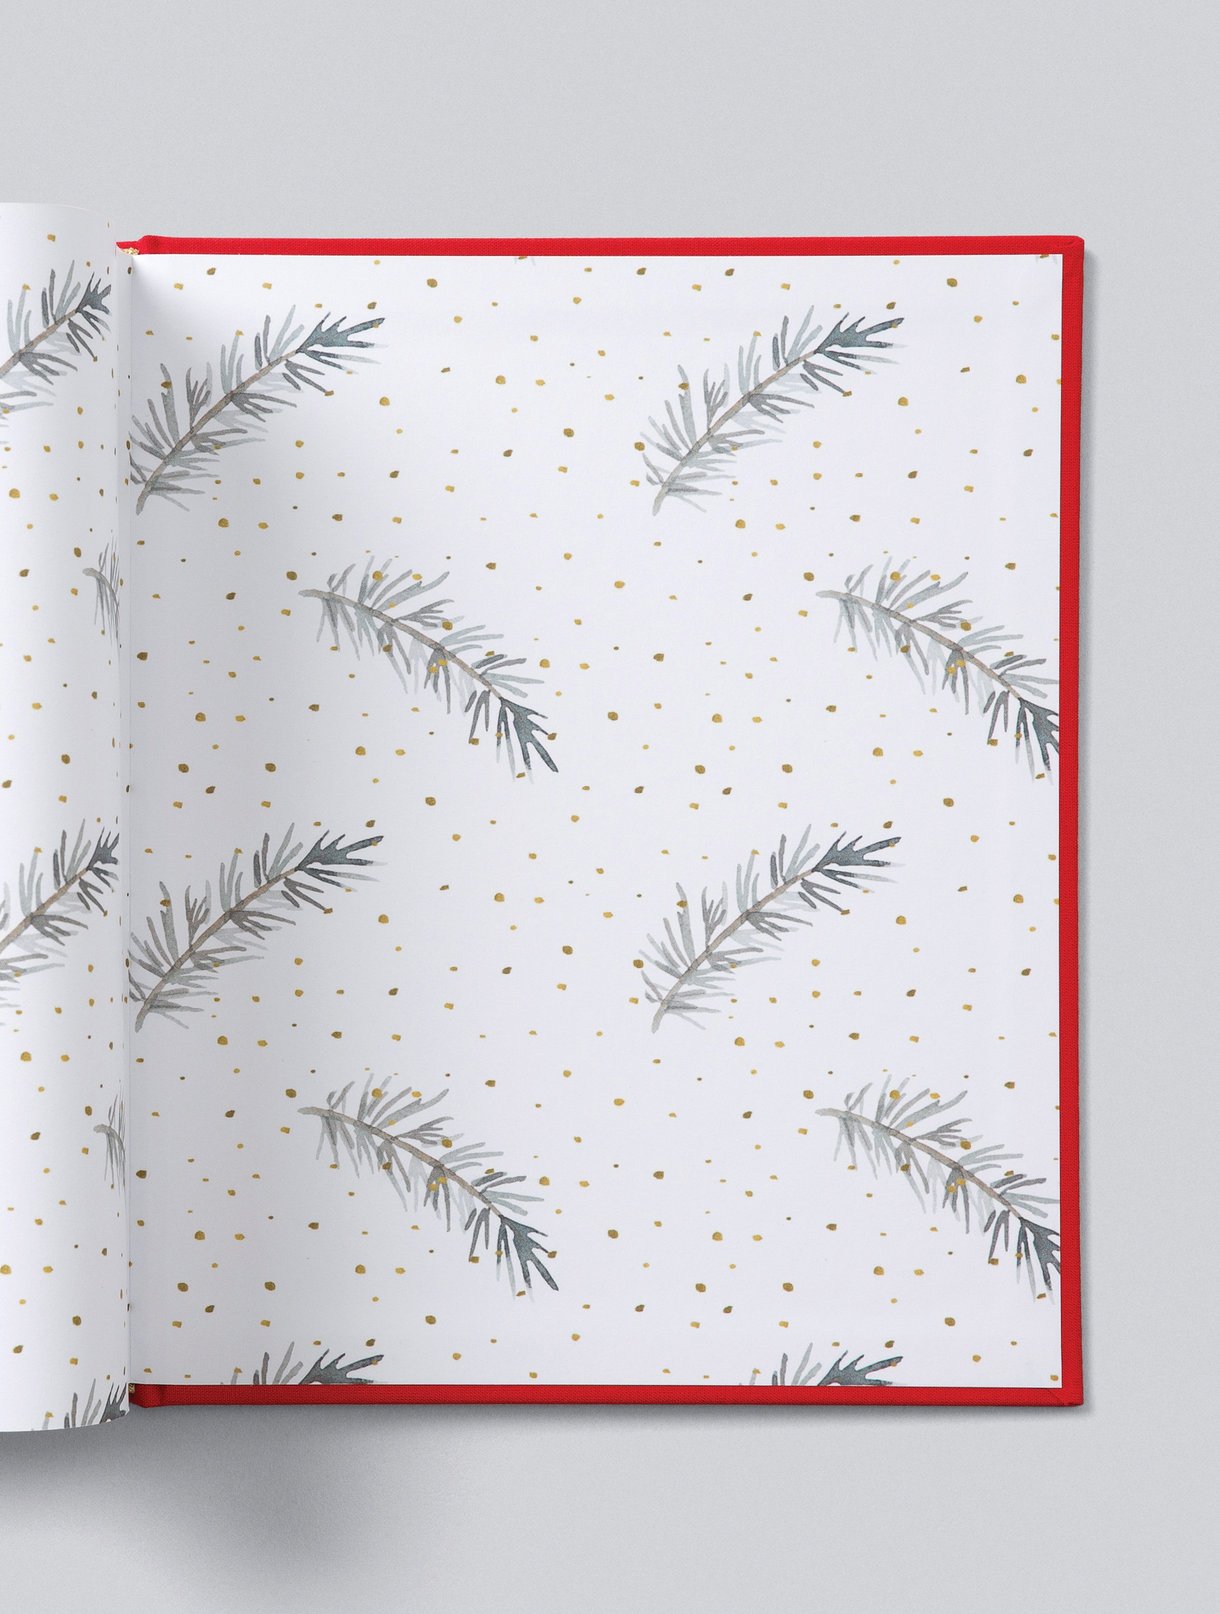 Christmas Journal | Red